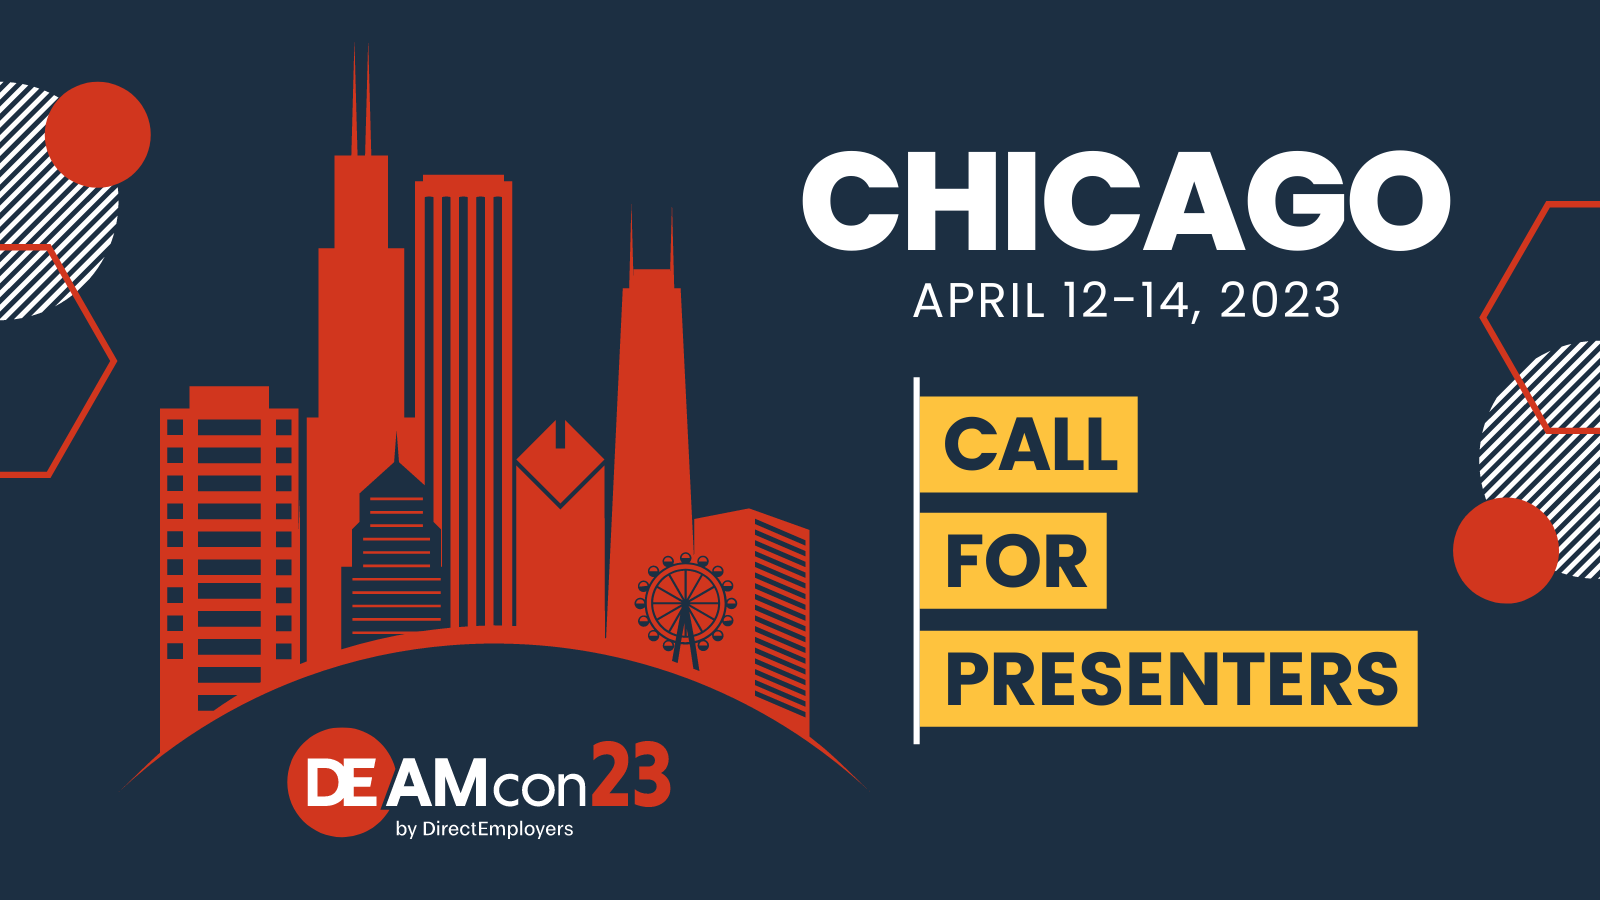 DEAMcon23 Chicago, April 12-14, 2023 - Call for Presenters